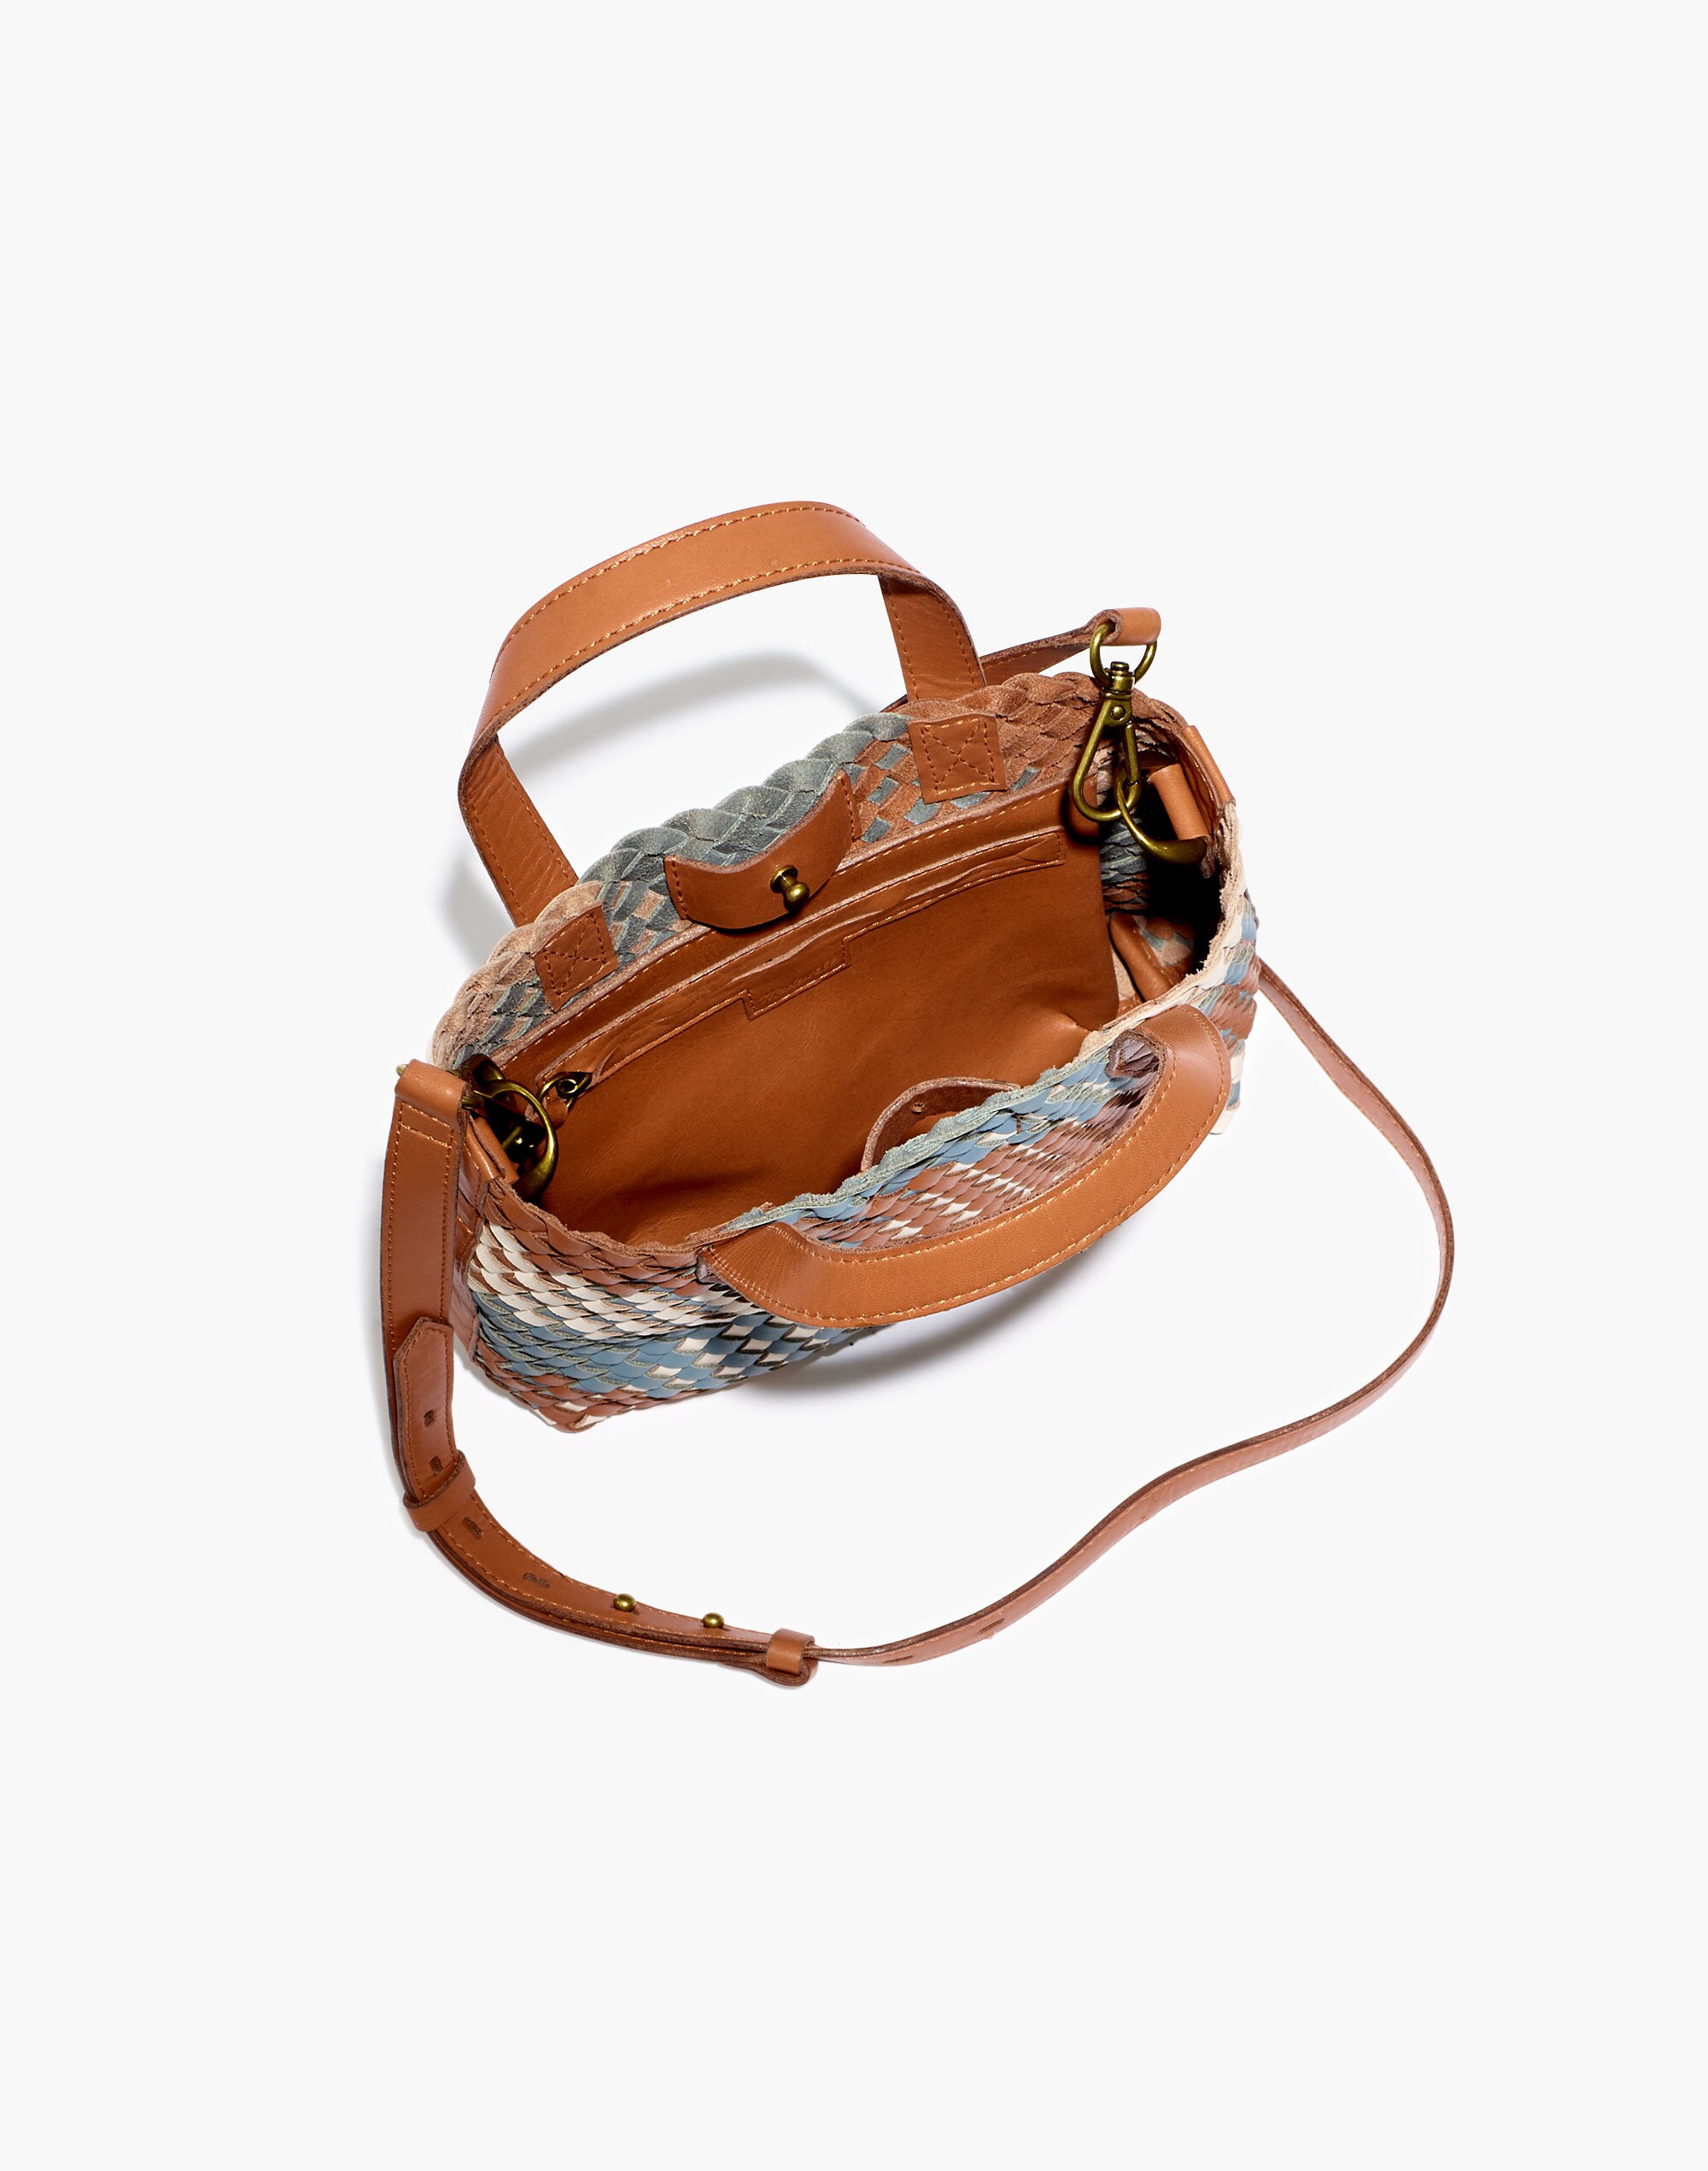 The Tritote: a Leather Crossbody Tote Bag / Handbag in Butter Red Clay